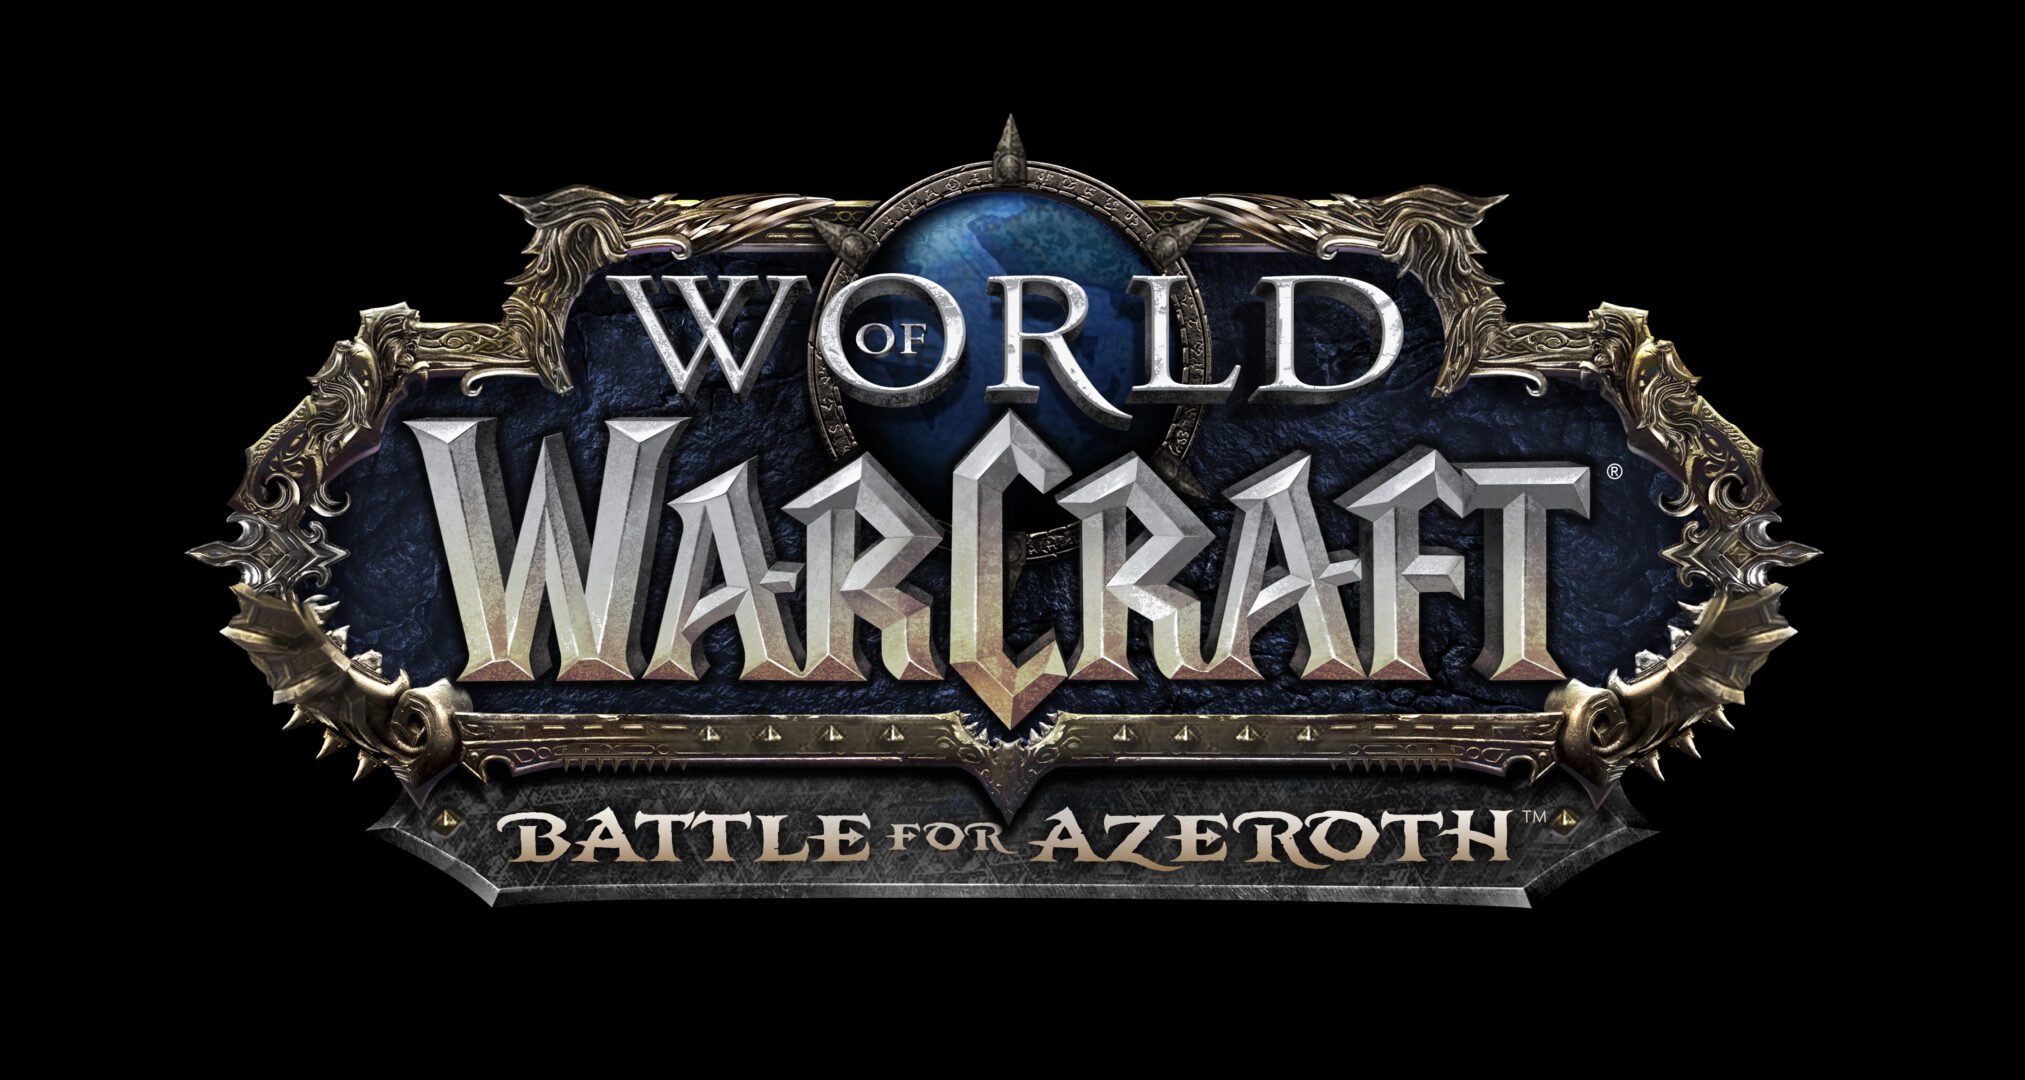 World of Warcraft Battle for Azeroth - WoW